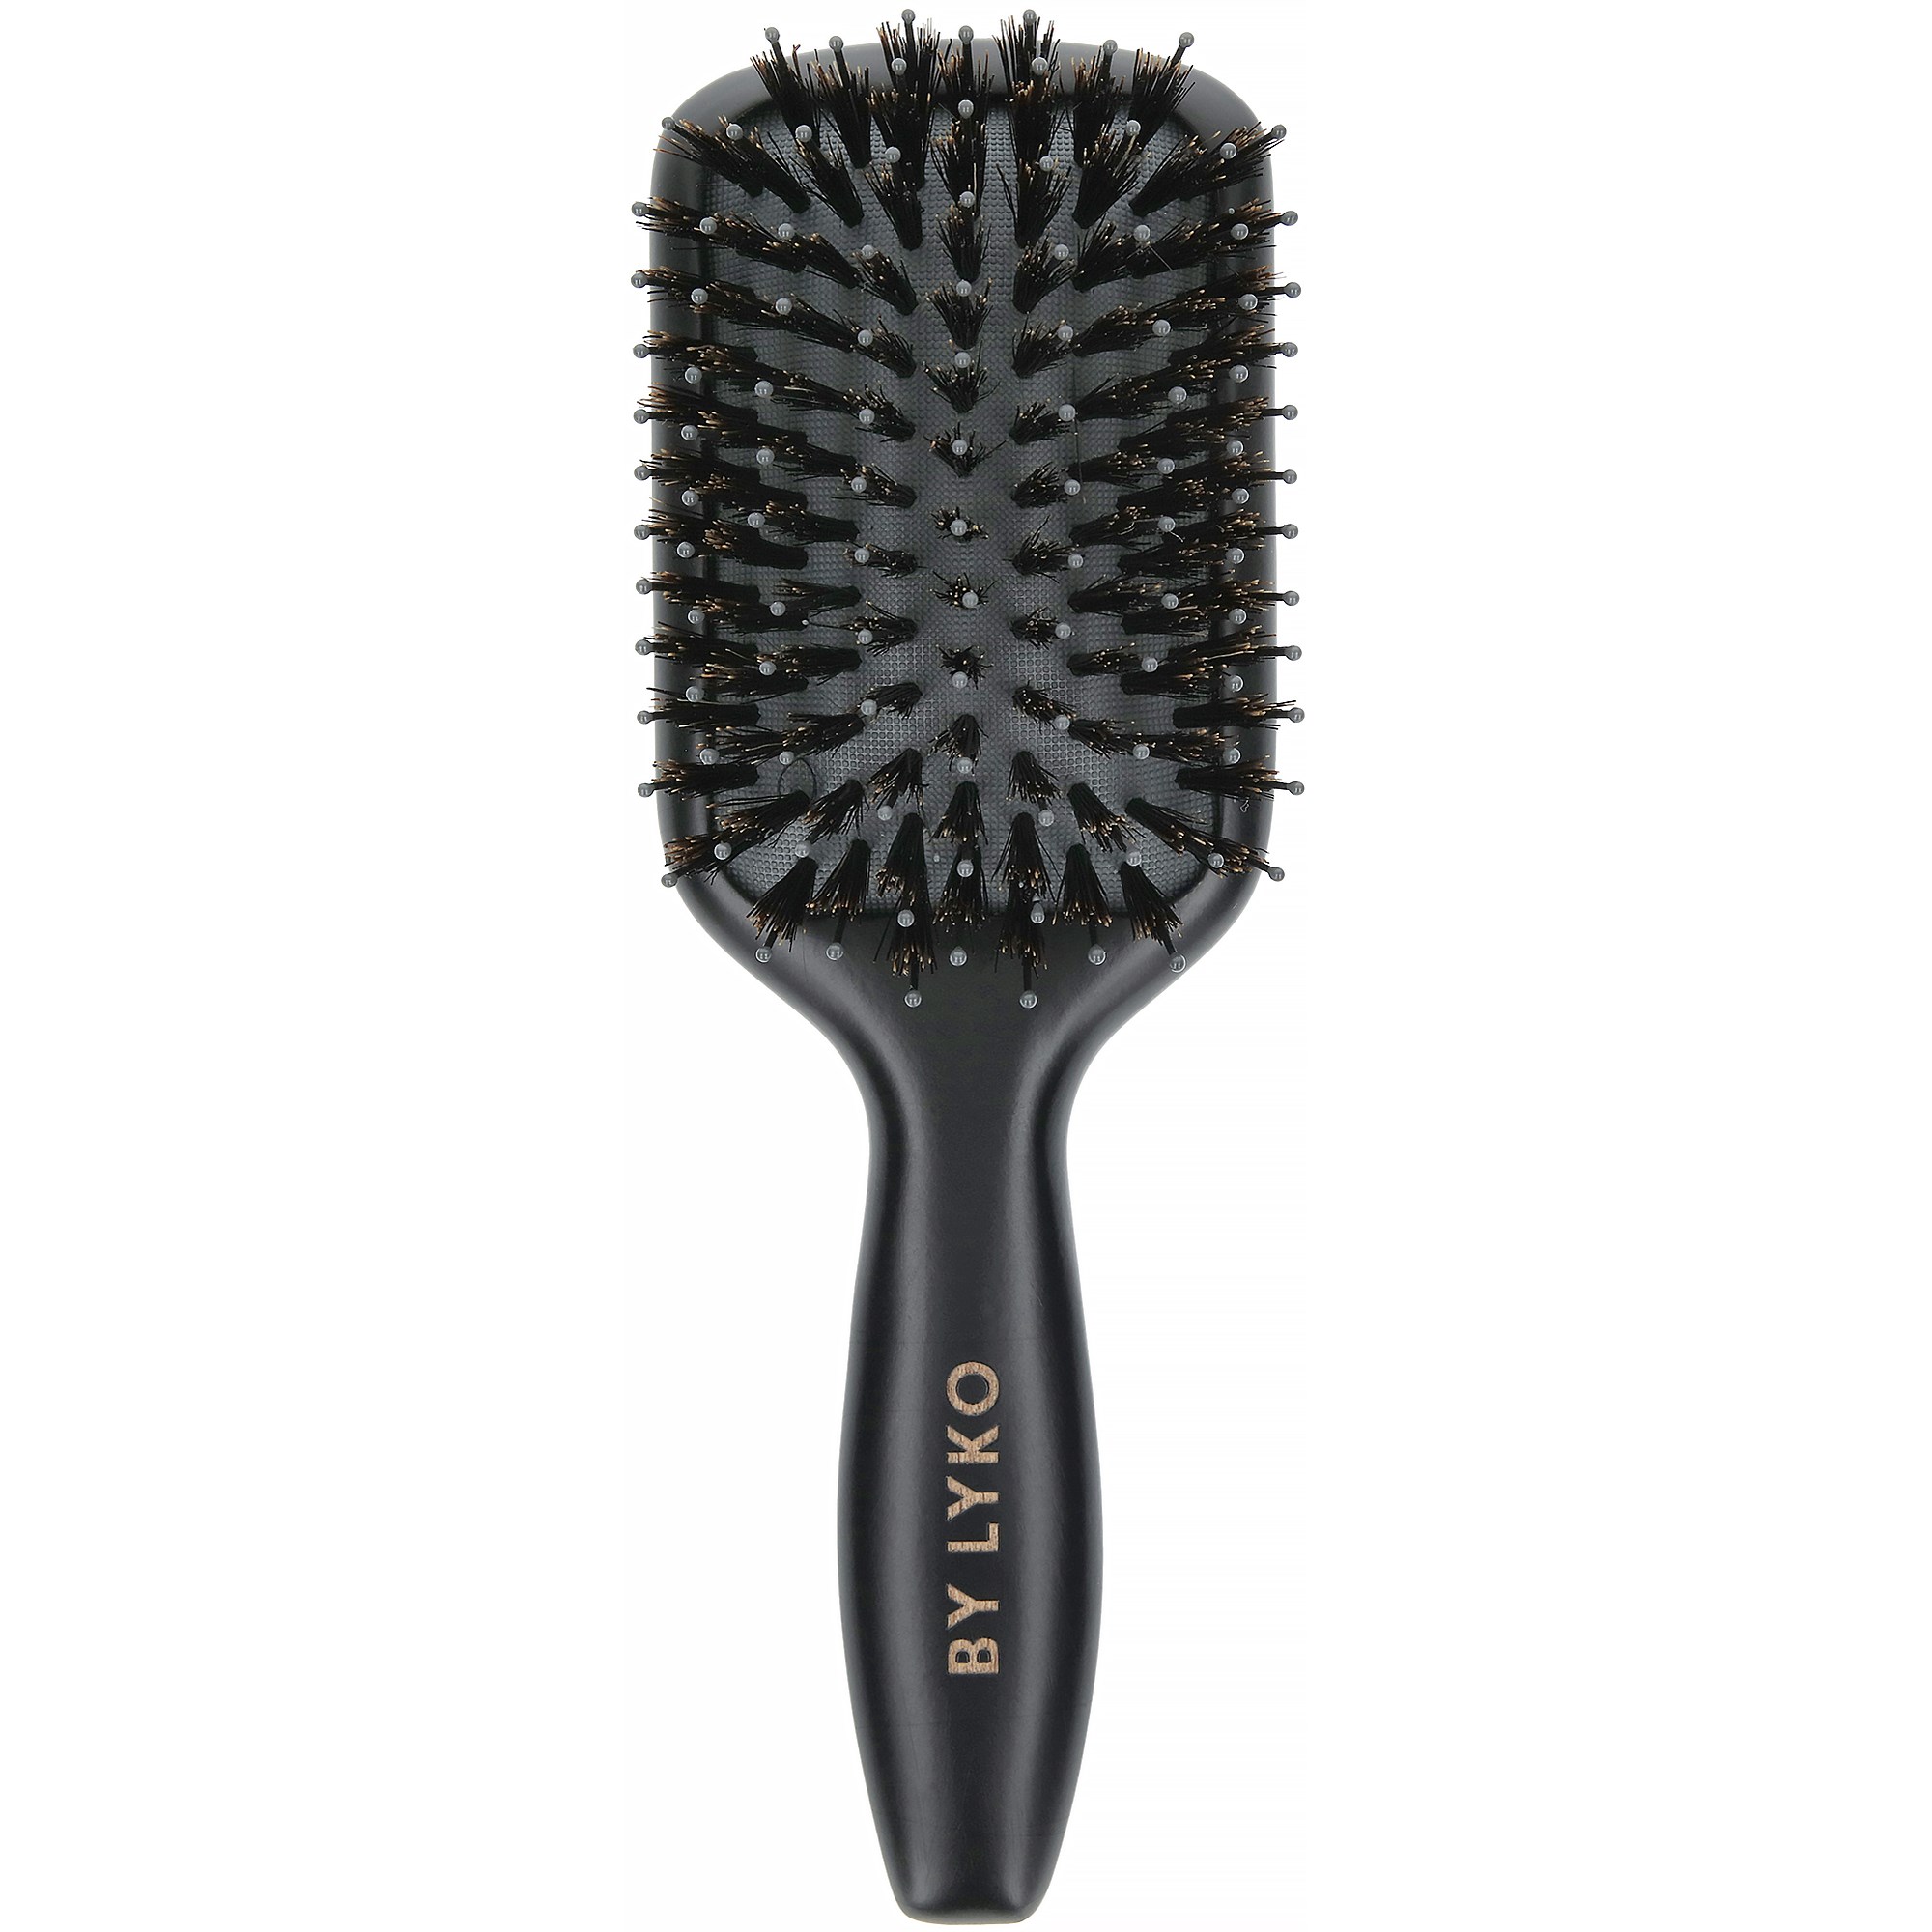 By Lyko Paddle Brush Porcupine